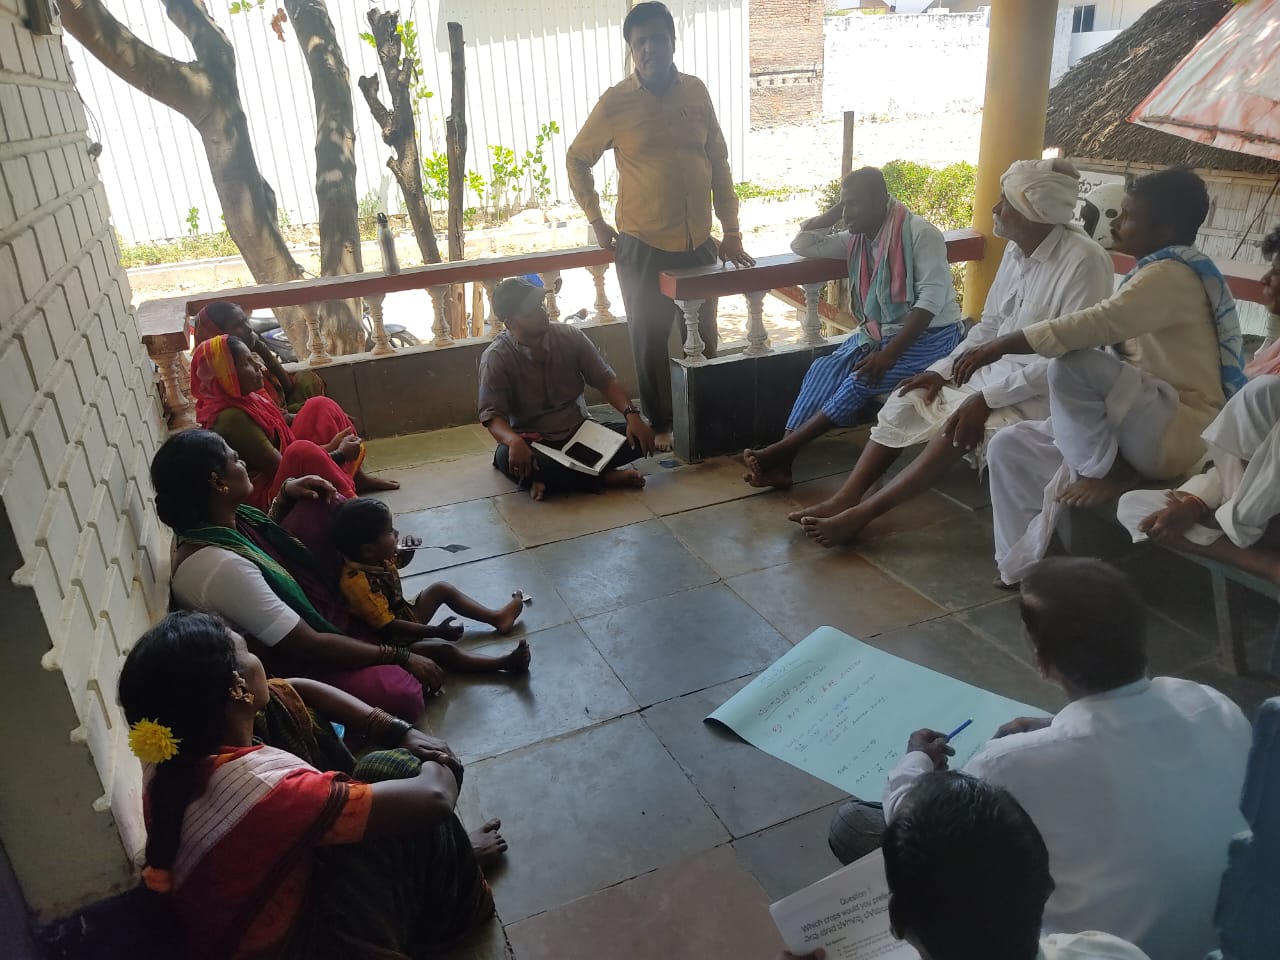 Farmer income workshop: One of the farmer groups discuss their plans for the next agricultural season. Credit: Syamkrishna P. Aryan